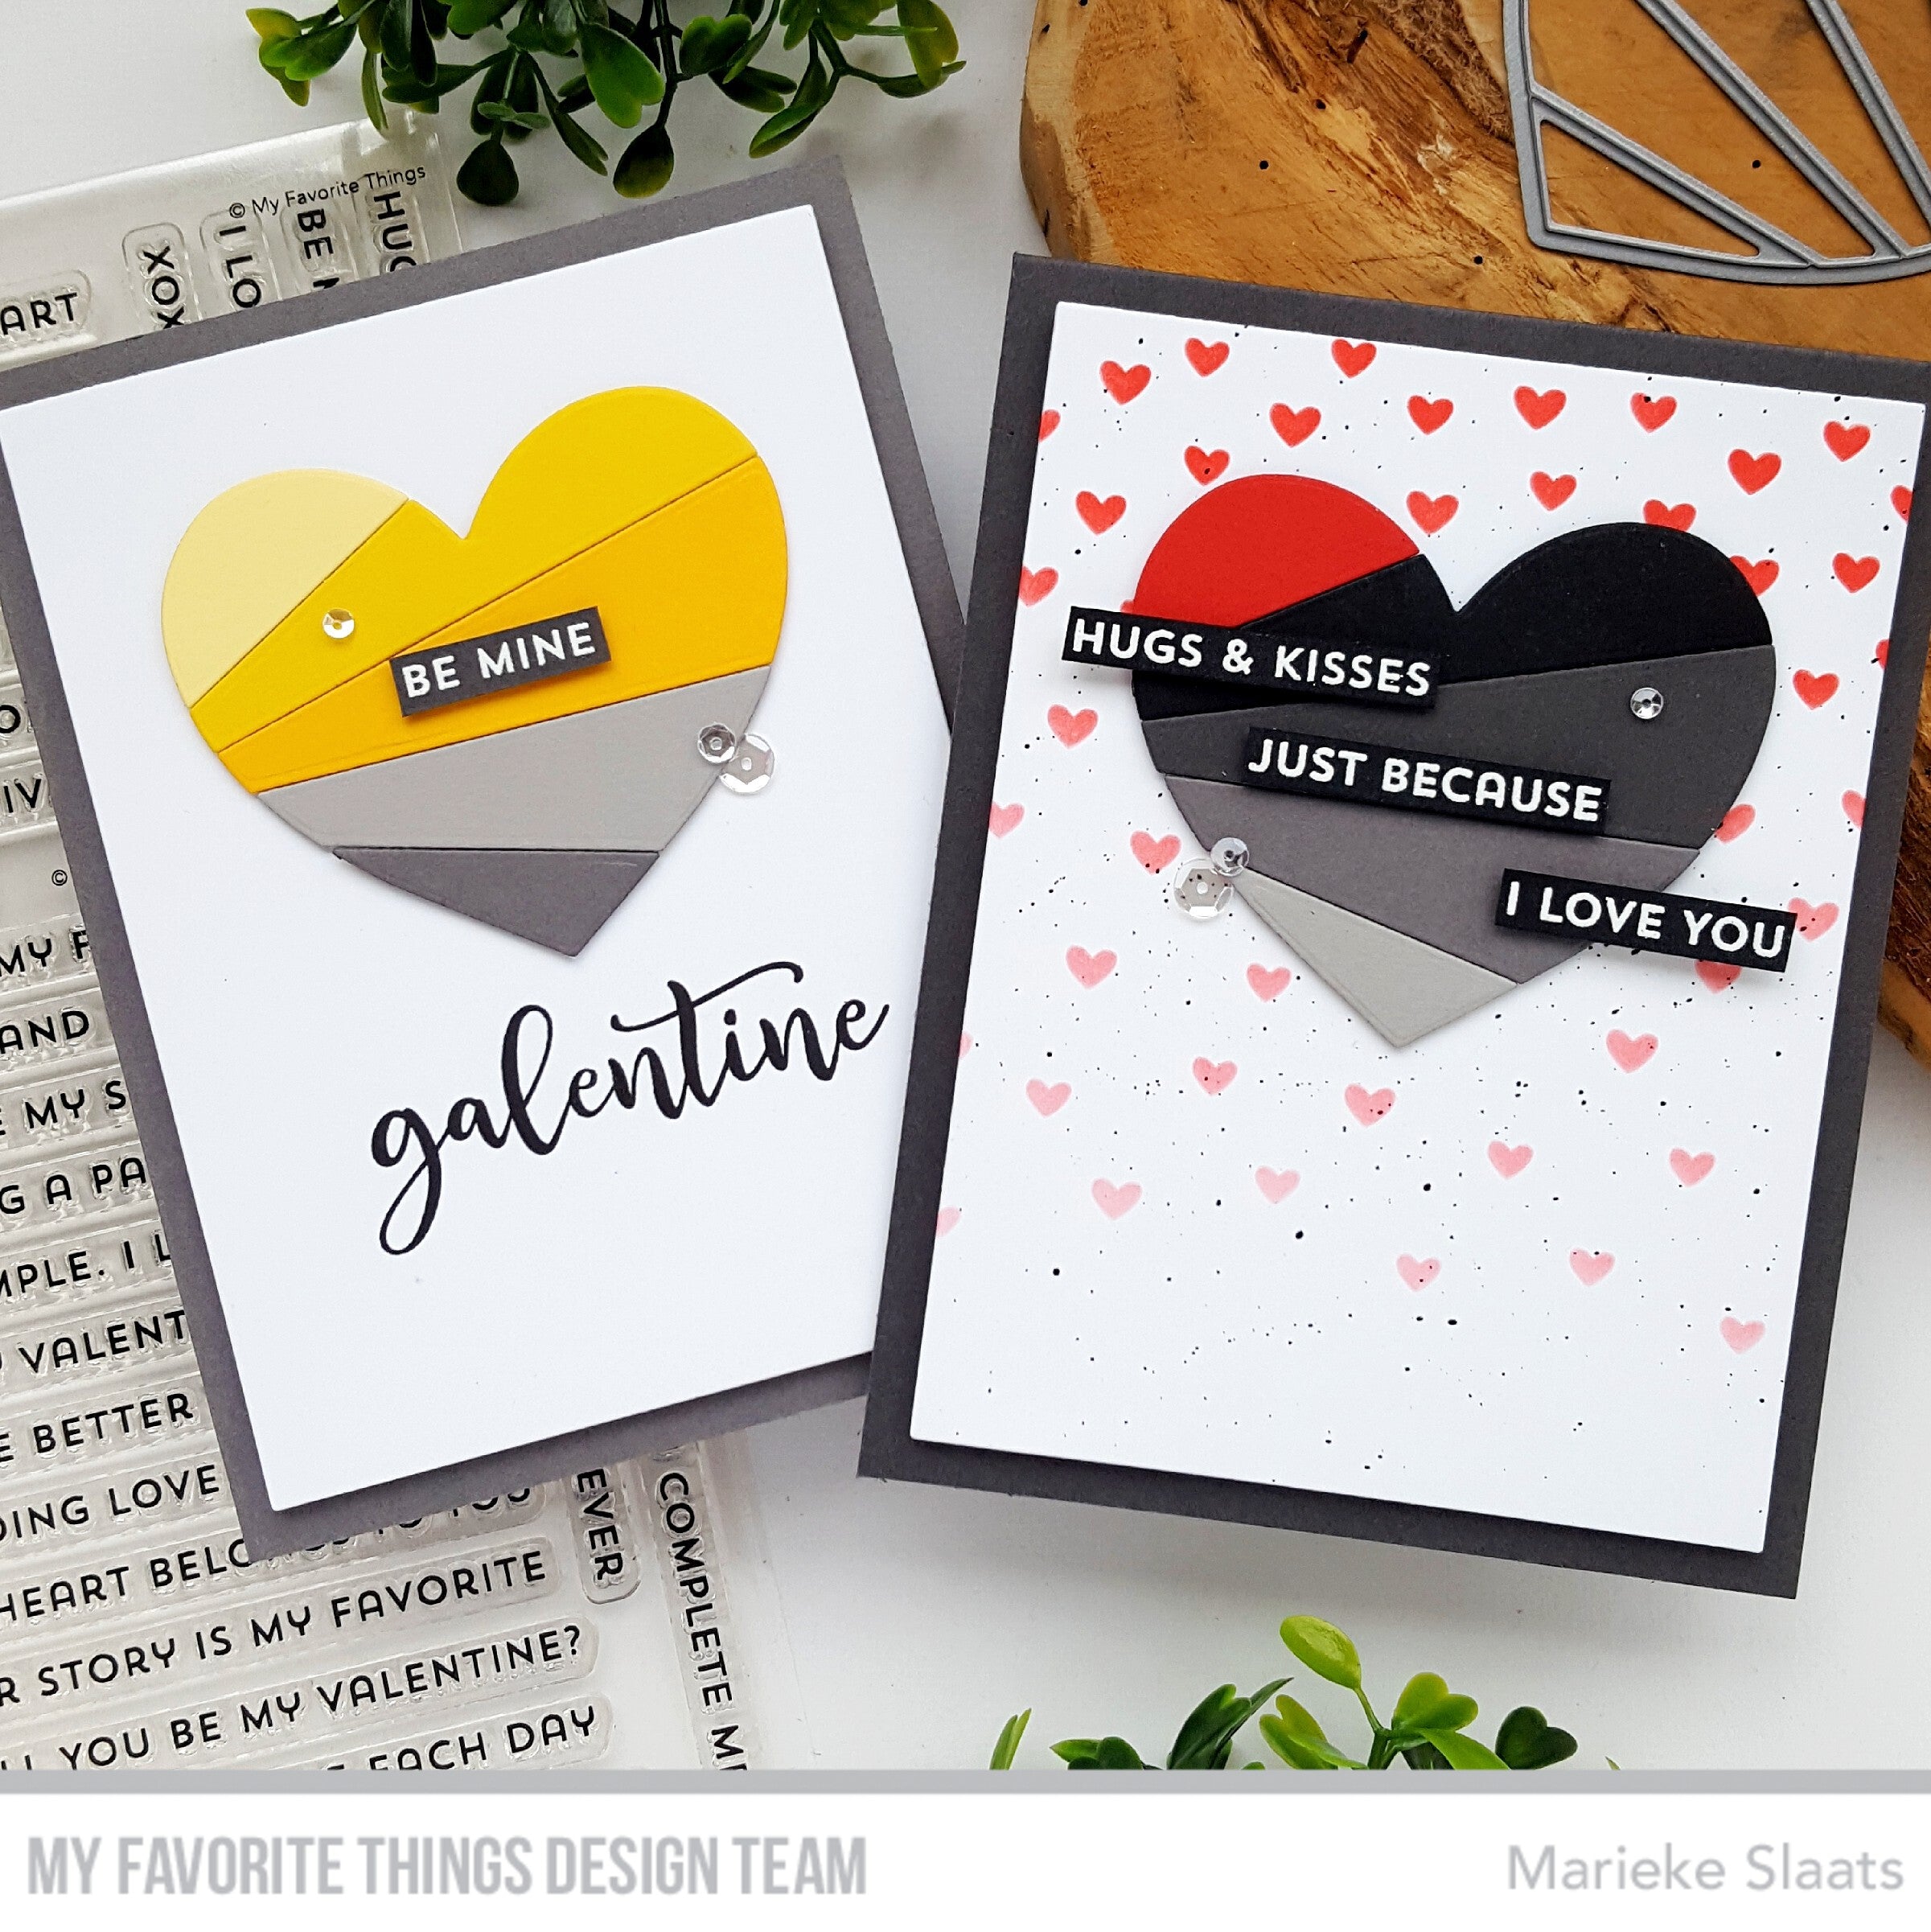 Handmade cards from Marieke Slaats featuring products from My Favorite Things #mftstamps